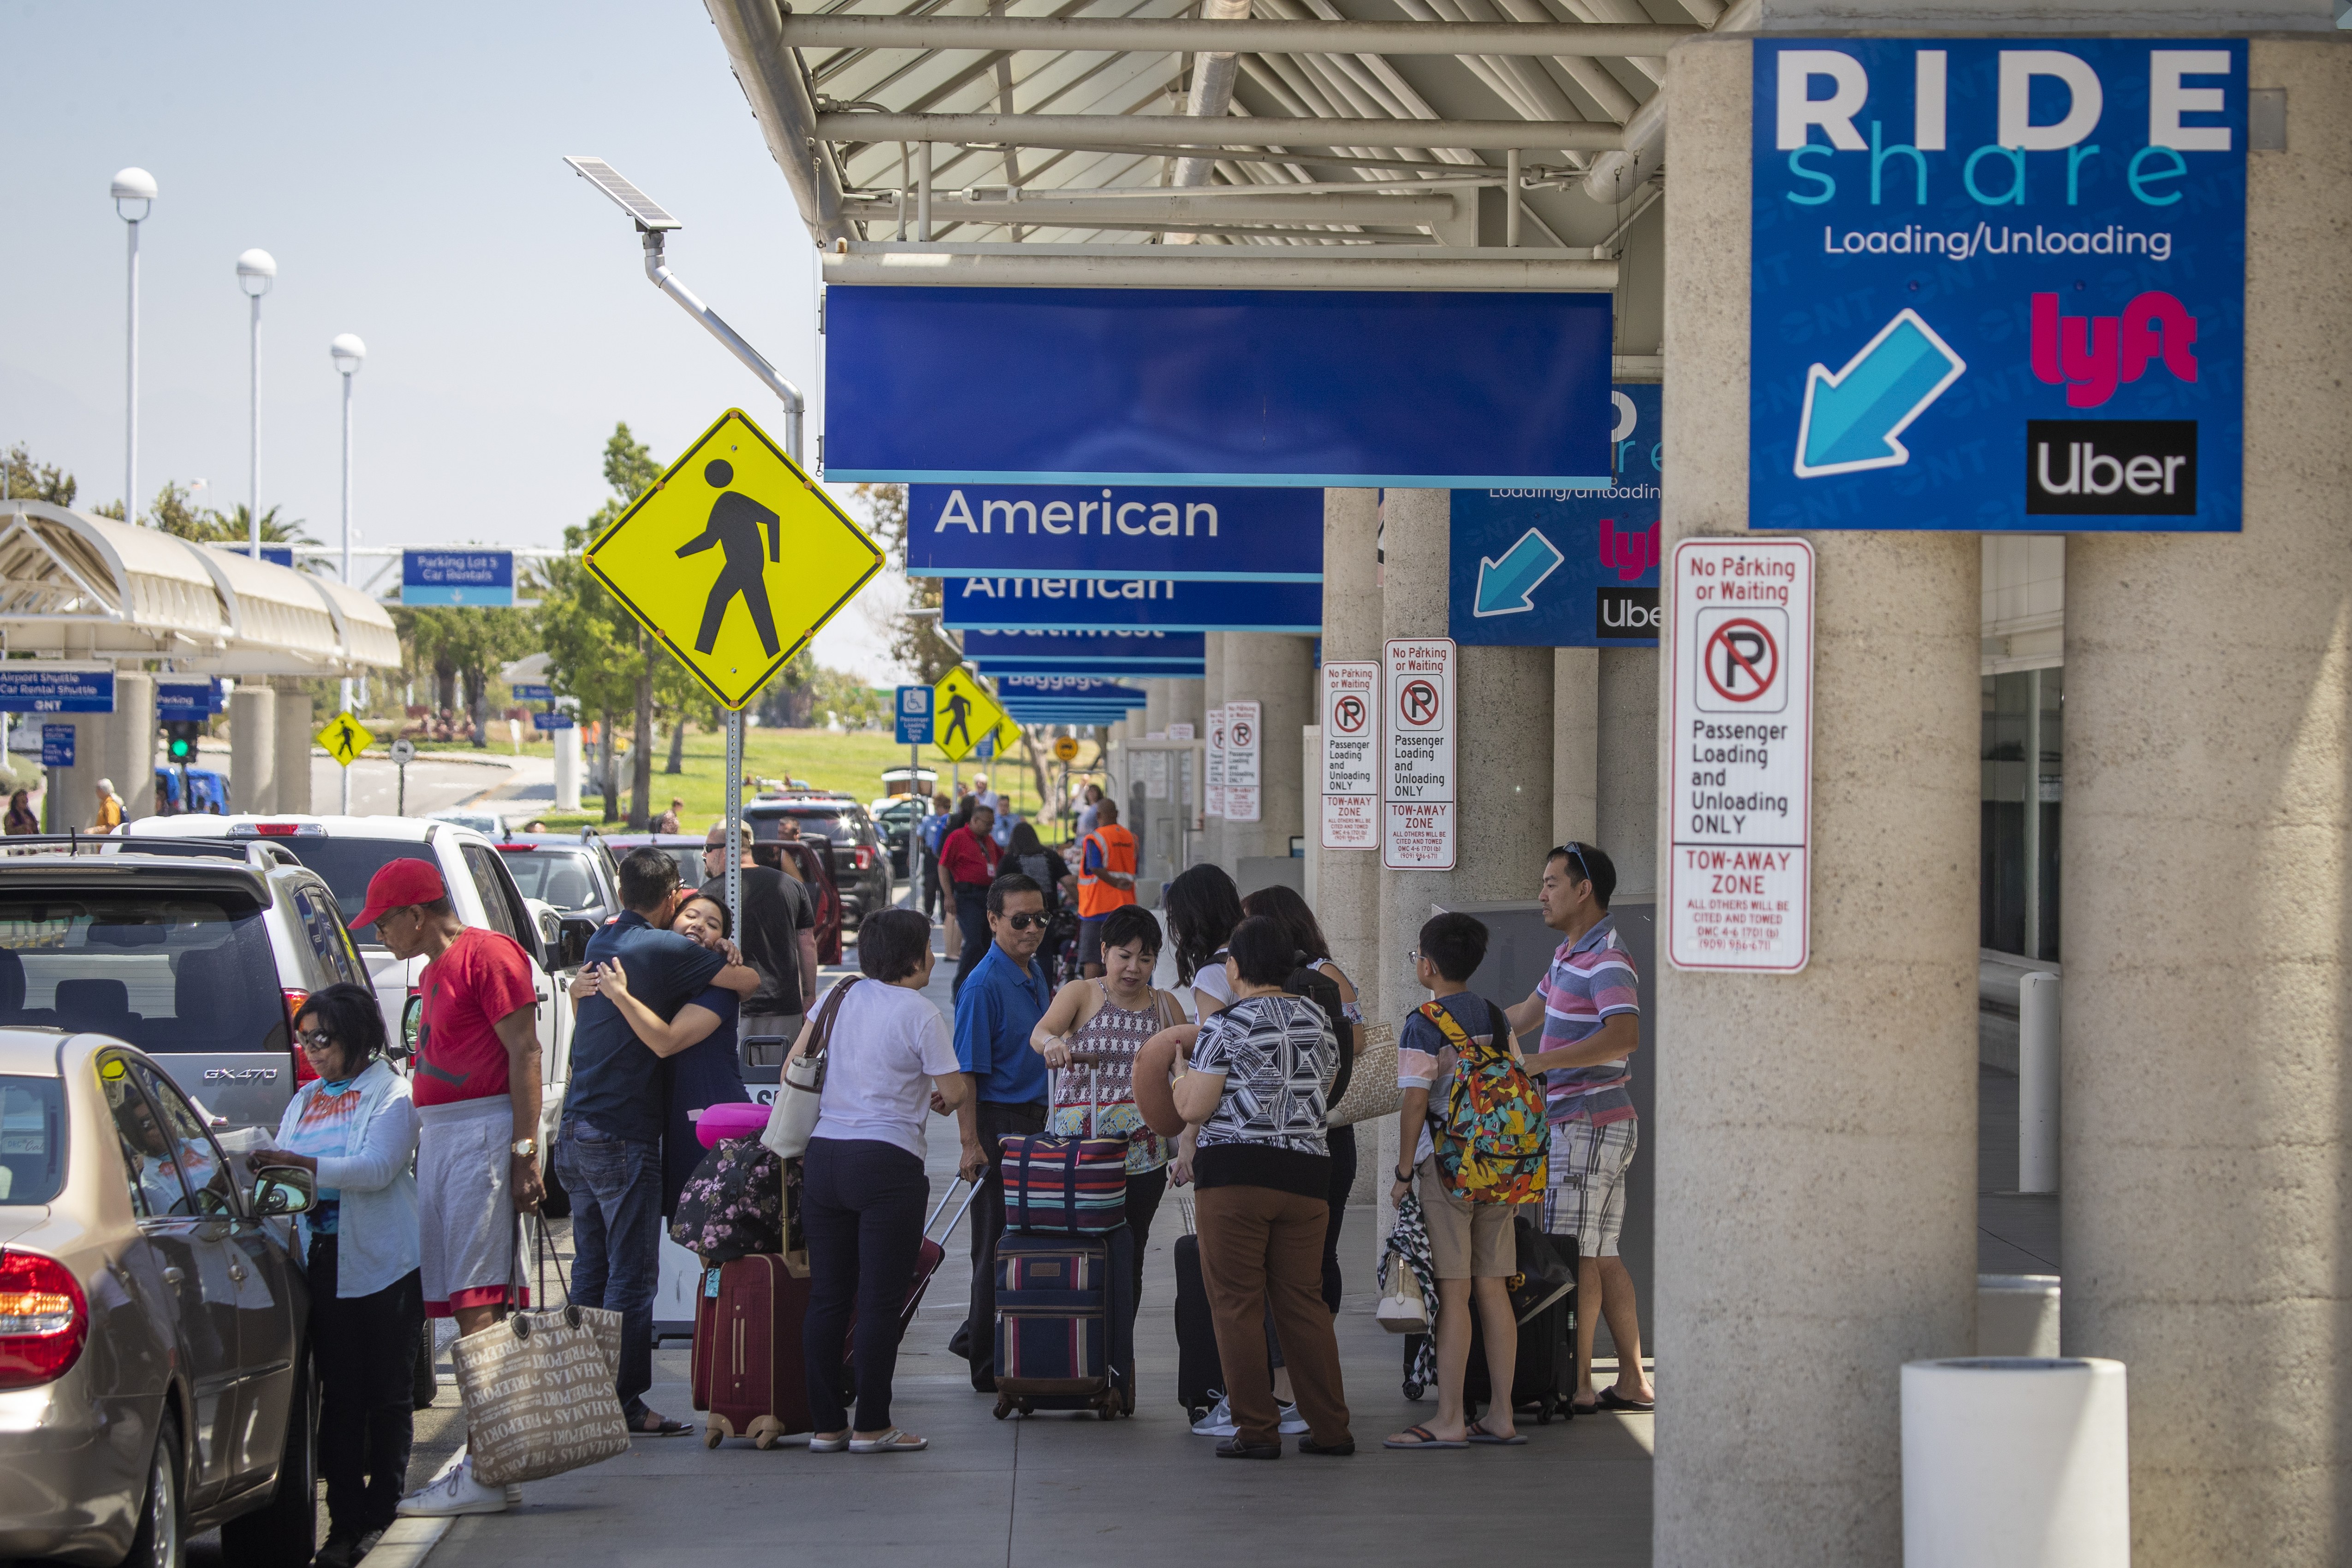 ONTARIO, CALIF. -- MONDAY, AUGUST 12, 2019: Travelers arrive in the ride-share pick up location at Ontario International Airport in Ontario Monday, Aug. 12, 2019. Uber said it will stop its service at Southern CaliforniaÕs Ontario International Airport because of fee increases. The airport said Lyft will stay. (Allen J. Schaben / Los Angeles Times)